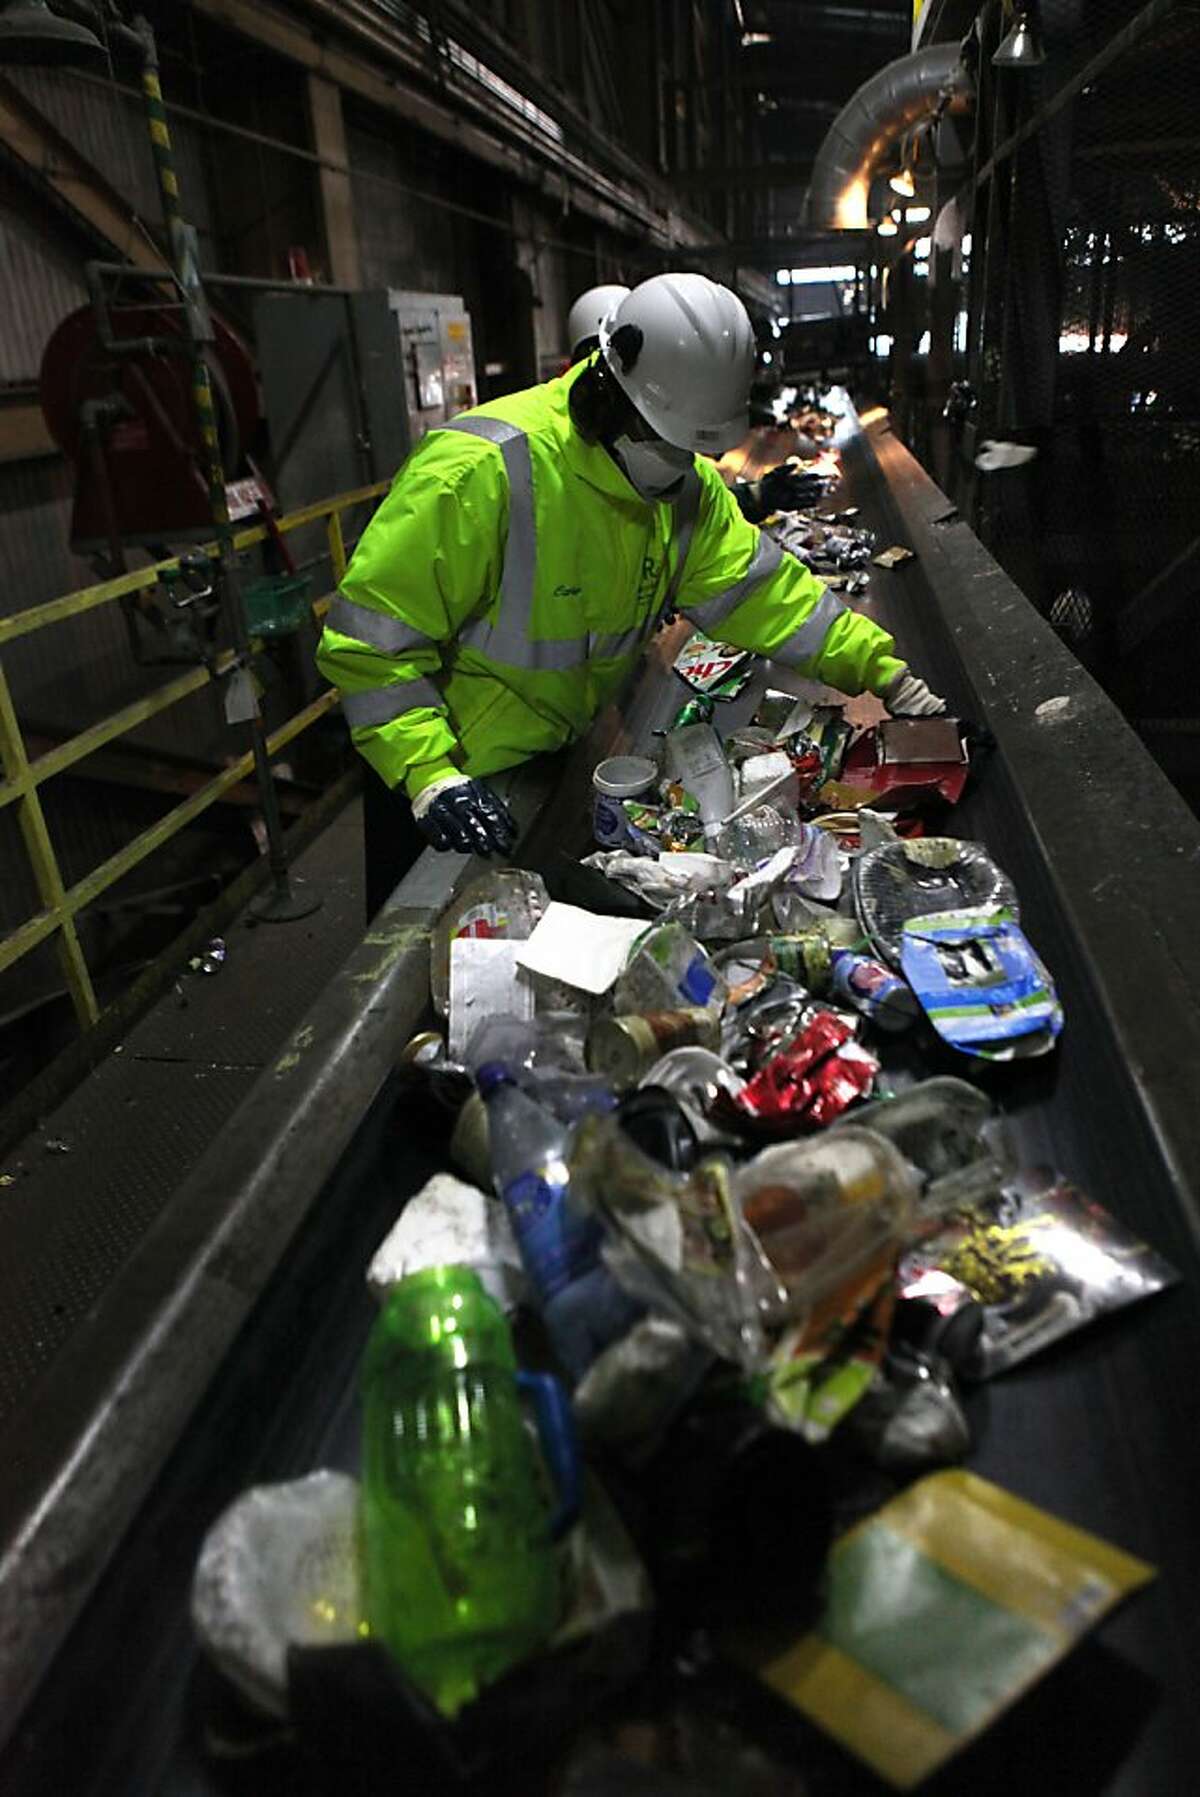 Recology staff sorting paper, cans, and plastics at the Recycle Center @ Pier 96 in San Francisco, California, on Wednesday, January 2, 2012.